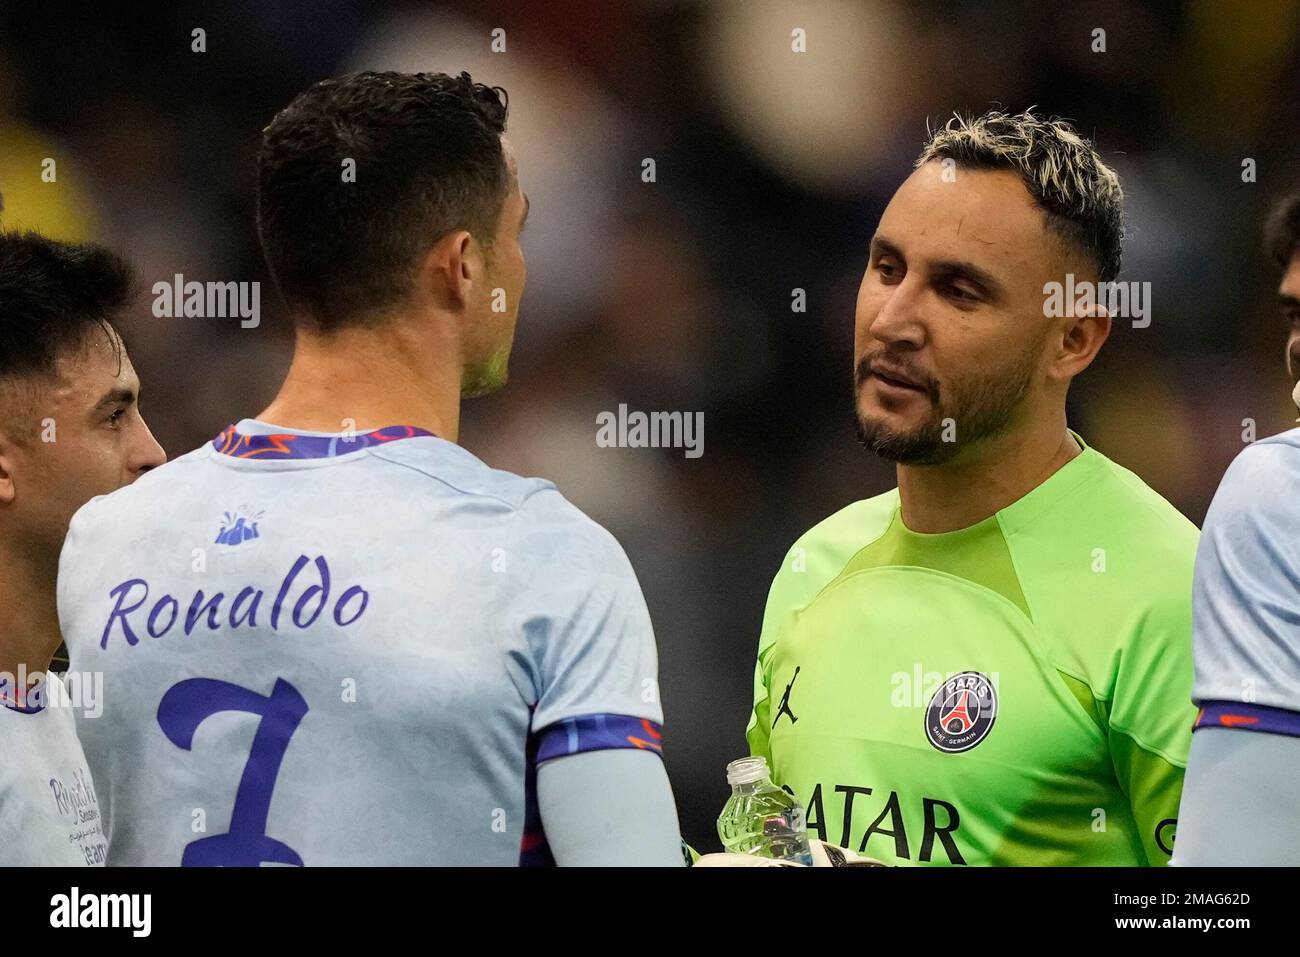 Cristiano Ronaldo talks with PSGs goalkeeper Keylor Navas as he plays for a combined XI of Saudi Arabian teams Al Nassr and Al Hilal against PSG during a friendly soccer match, at